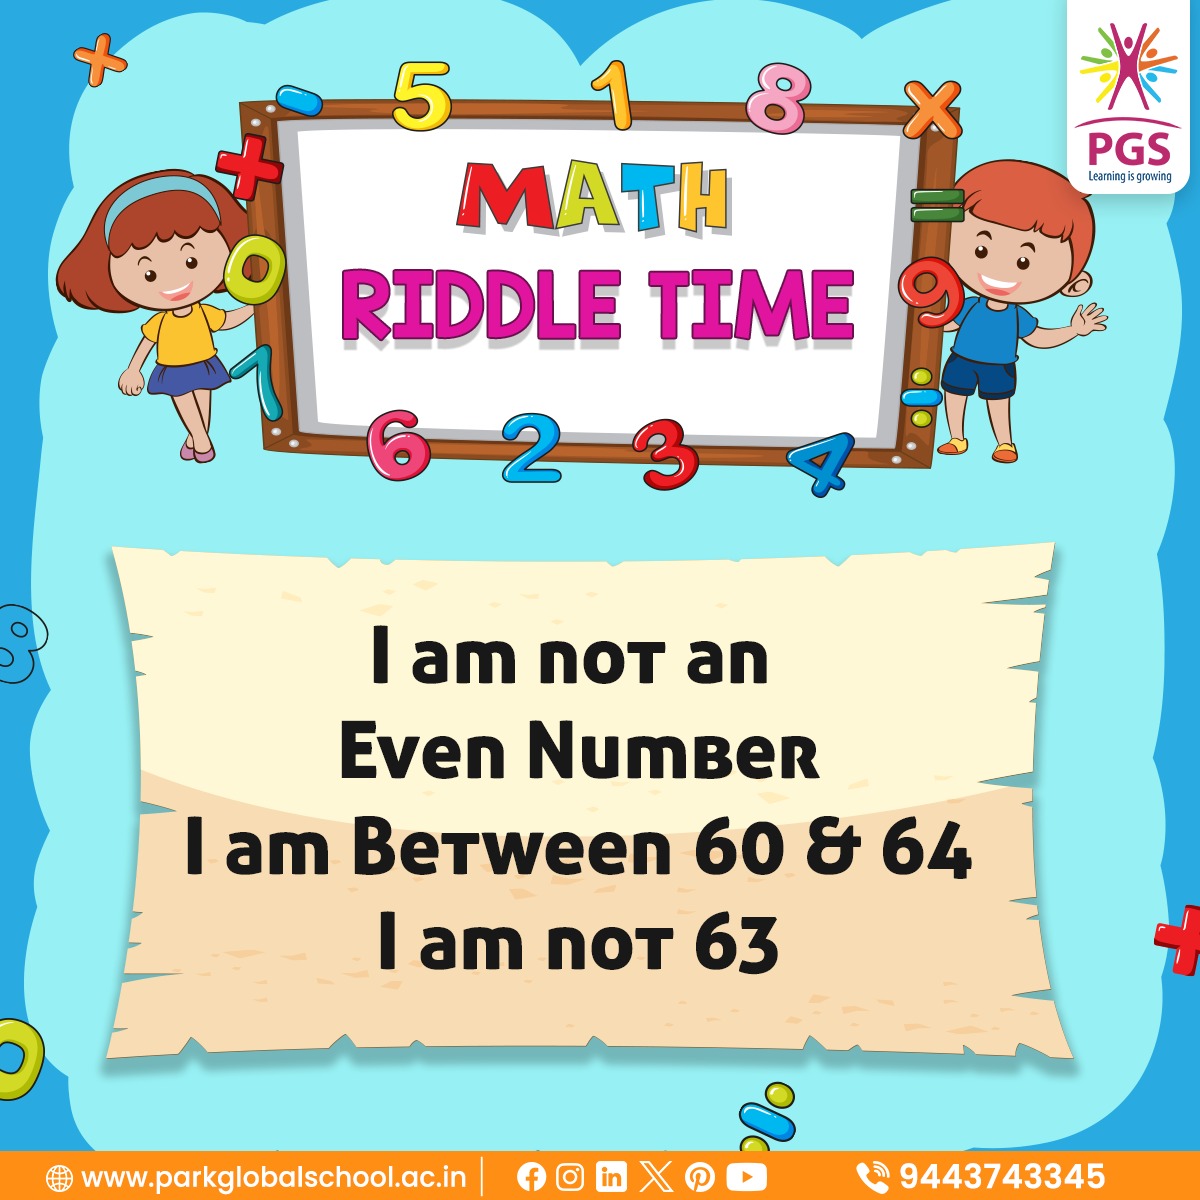 Time for Your Weekly Riddle!

Exercise your brain with this challenging math puzzle.

Drop your solutions in the comments below!

#Parkglobalschool #PGS #BestcbseschoolinCoimbatore #BestcoachingatPGS #WeekendQuiz #QuizChallenge #MathsFun #LearningThroughFun #AnswerChallenge